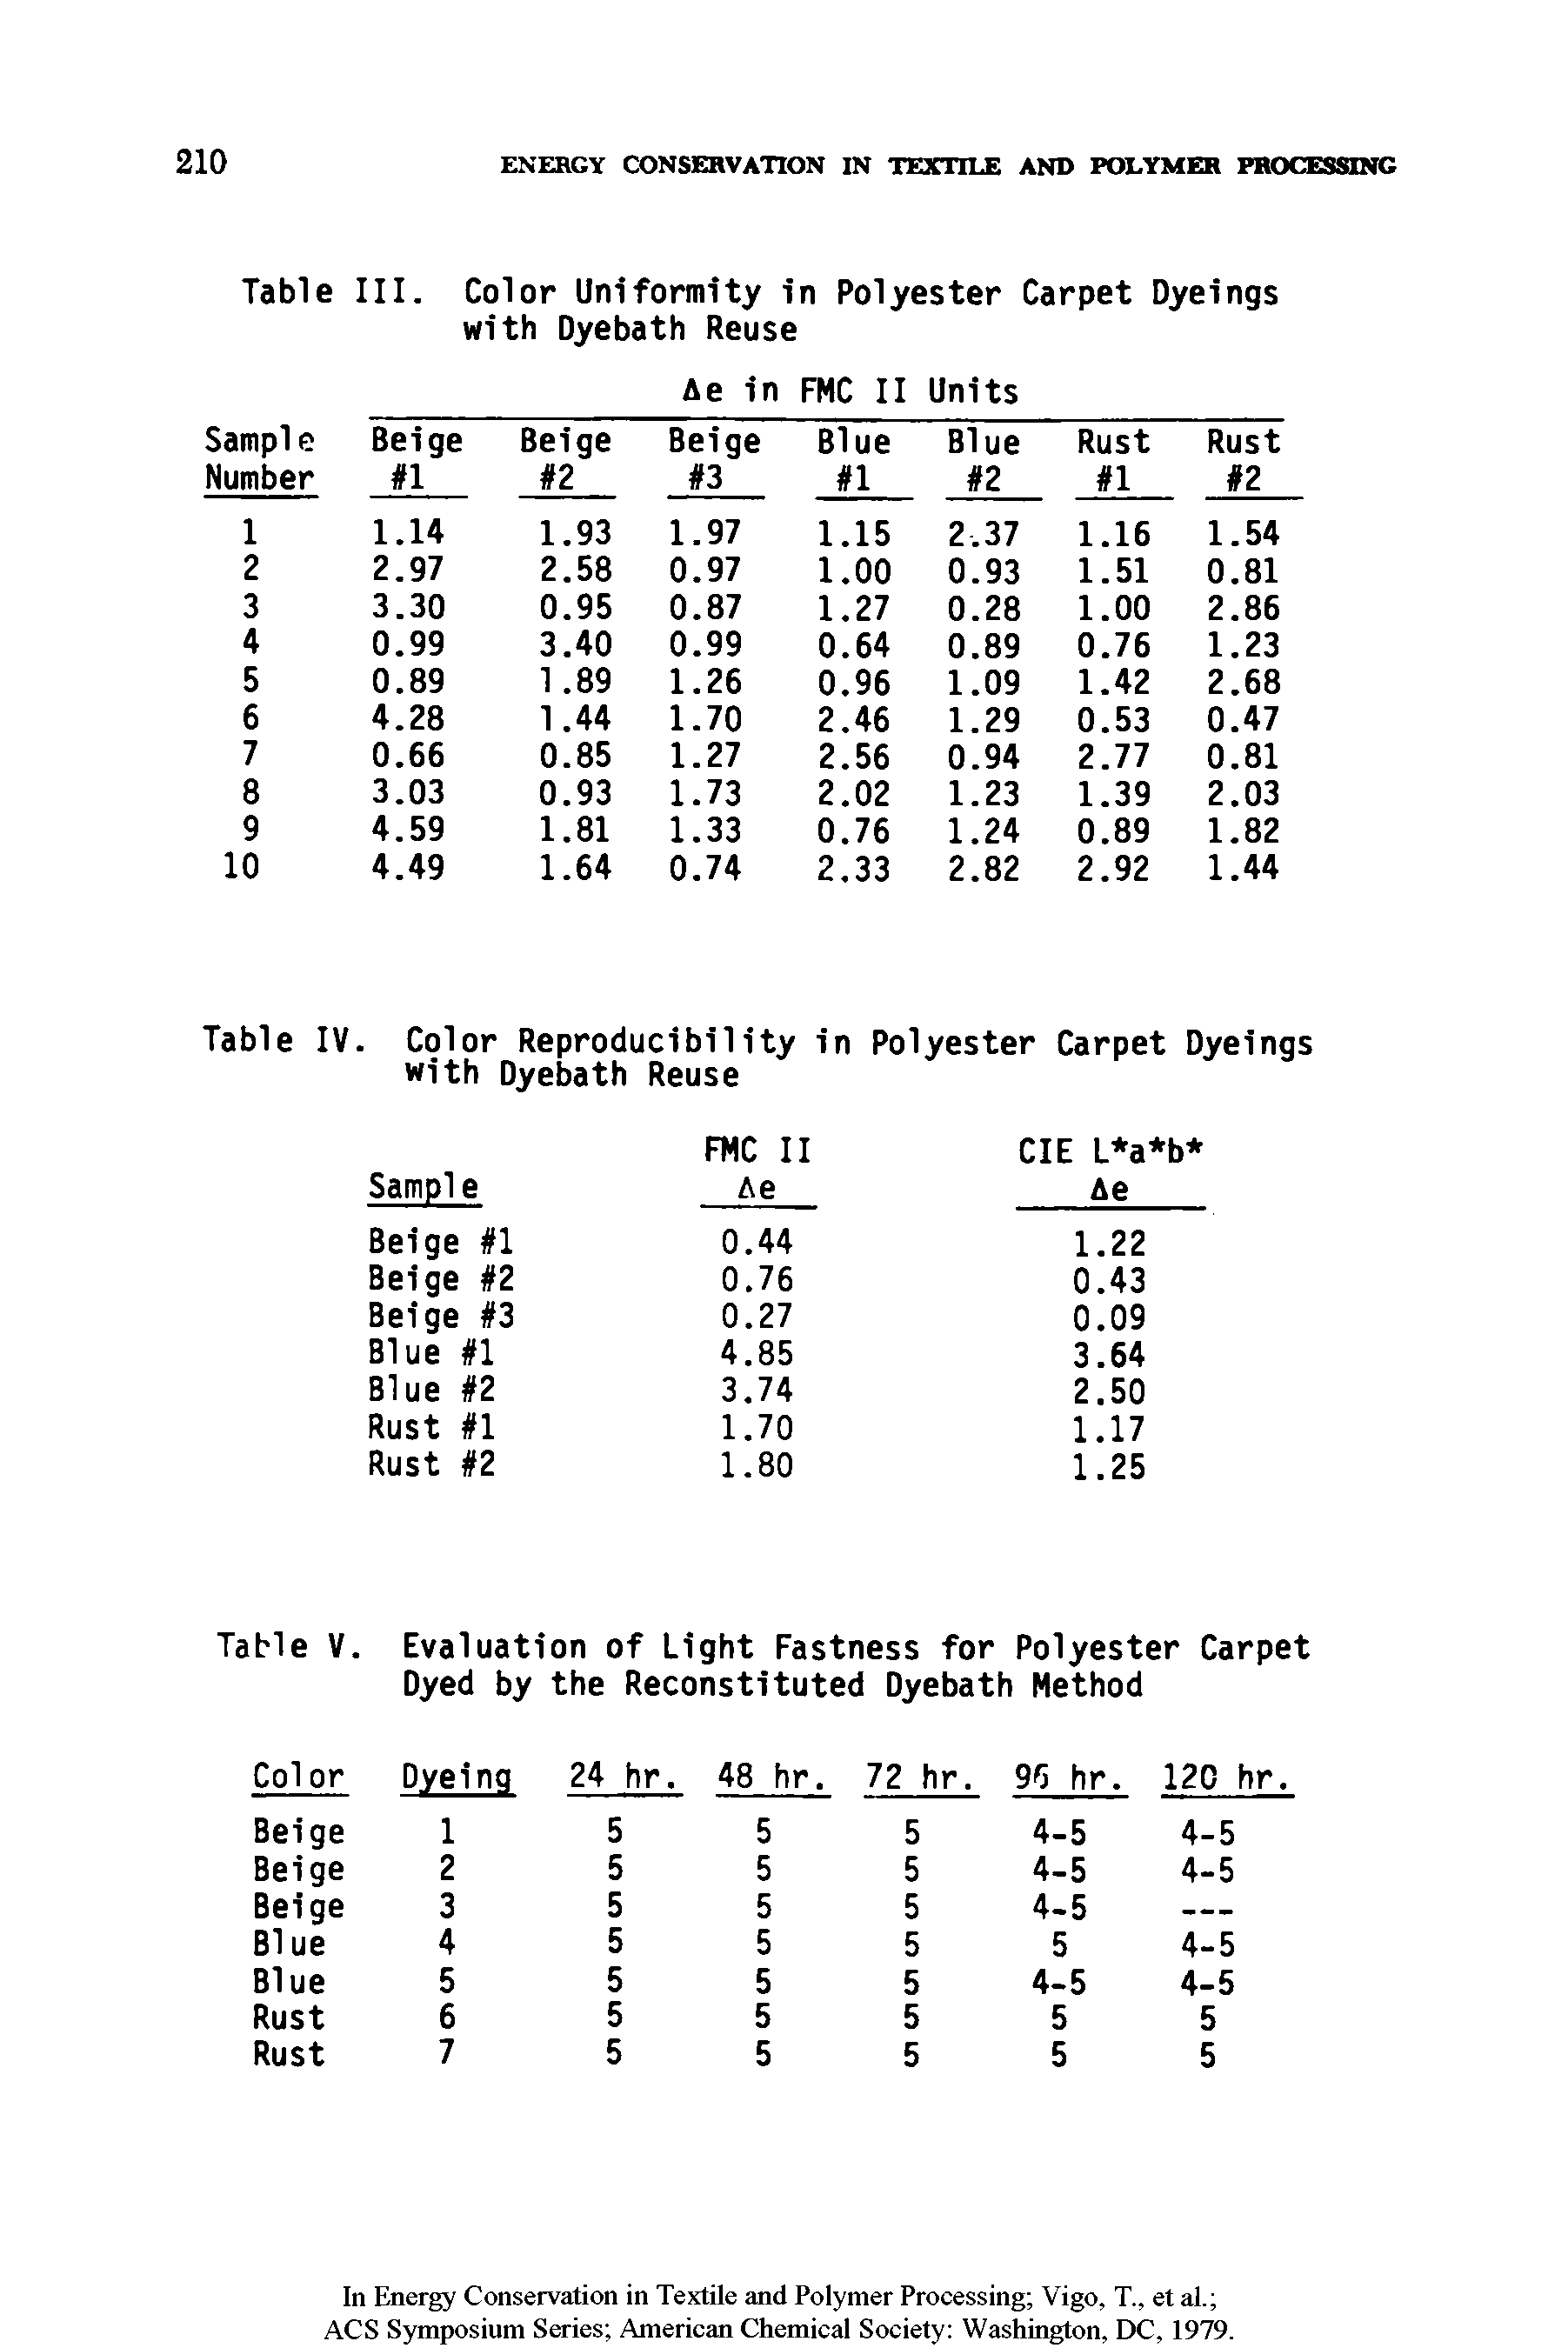 Table V. Evaluation of Light Fastness for Polyester Carpet Dyed by the Reconstituted Dyebath Method...